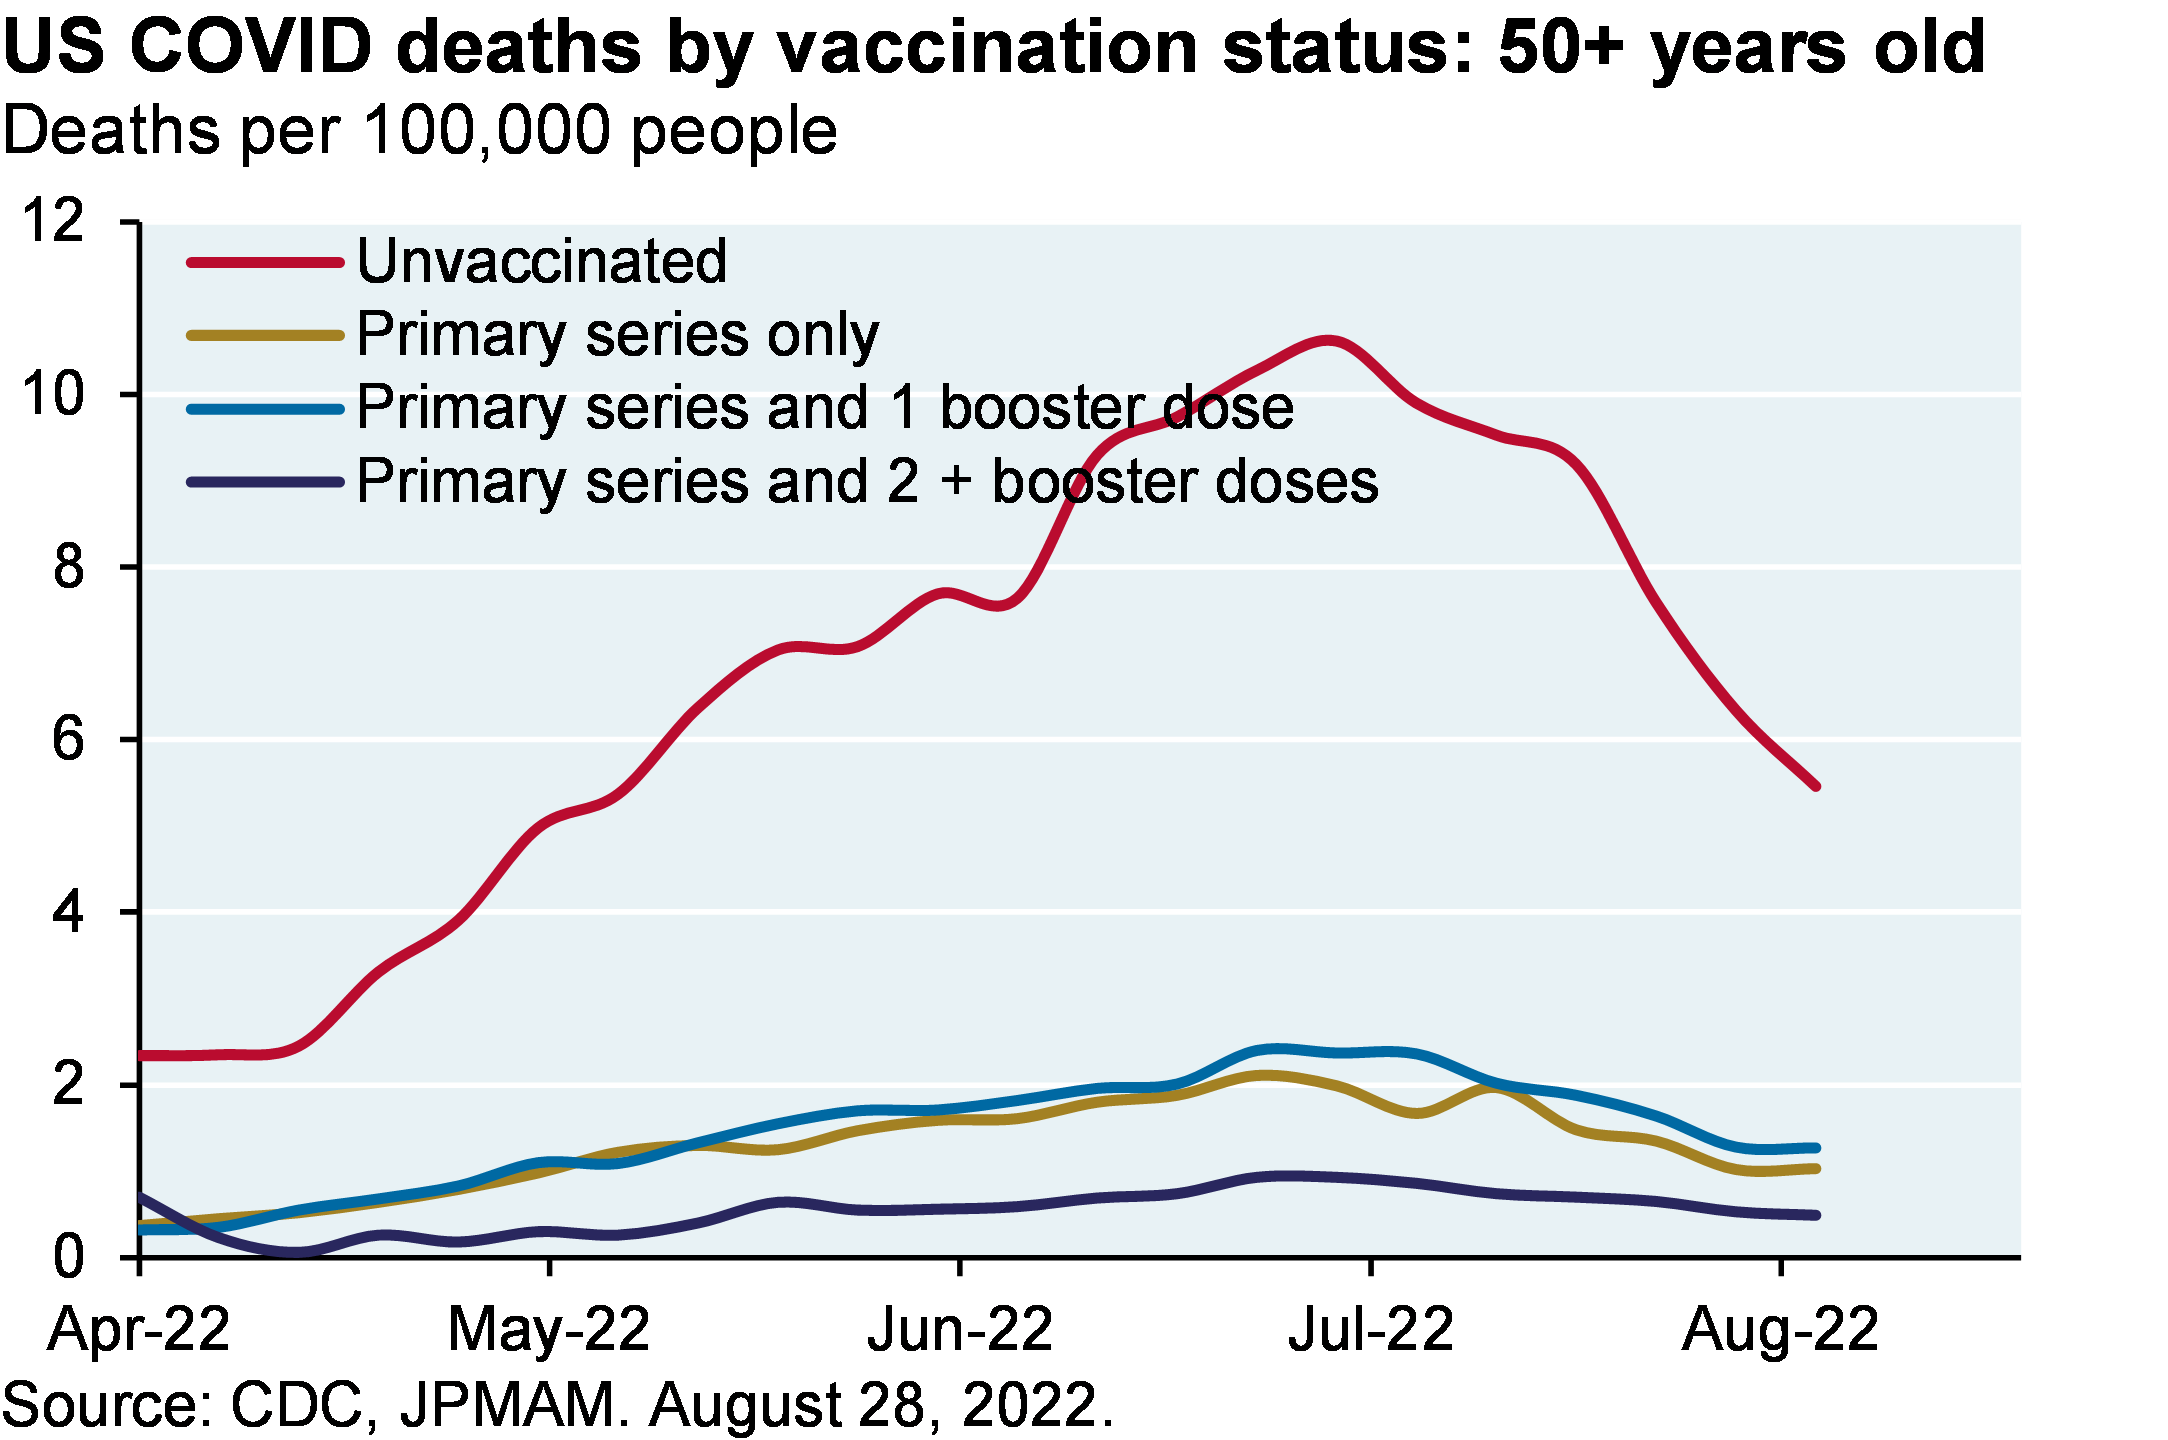 Line chart shows mortality rates for the US unvaccinated population vs the vaccinated population by doses received. All of the mortality rates for vaccinated populations are significantly lower than the unvaccinated population, with rates decreasing with booster shots